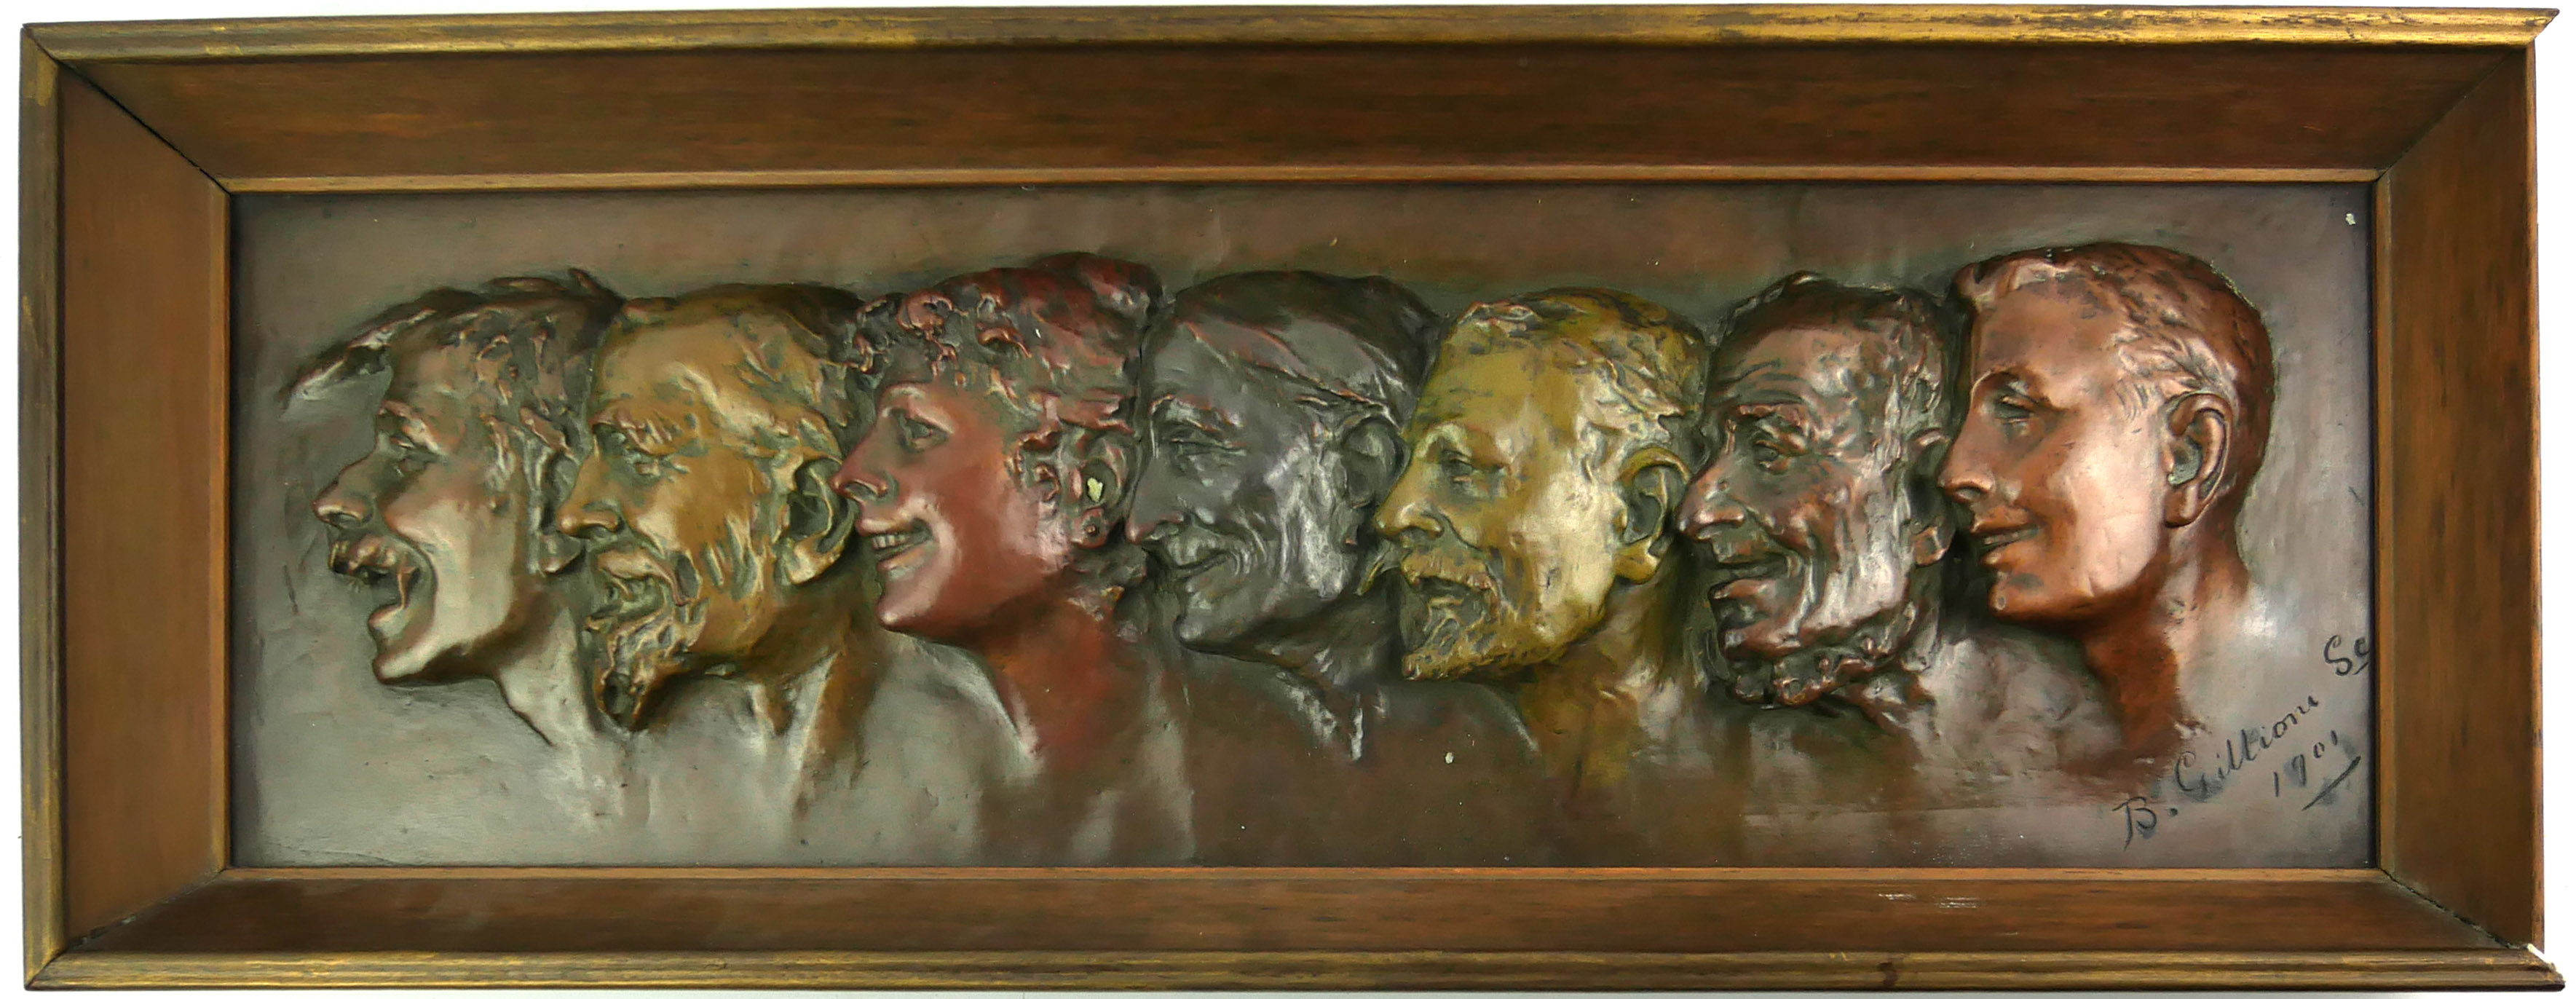 AN EARLY 20TH CENTURY CONTINENTAL BRONZE GROUP RECTANGULAR PORTRAIT PLAQUE With seven embossed heads